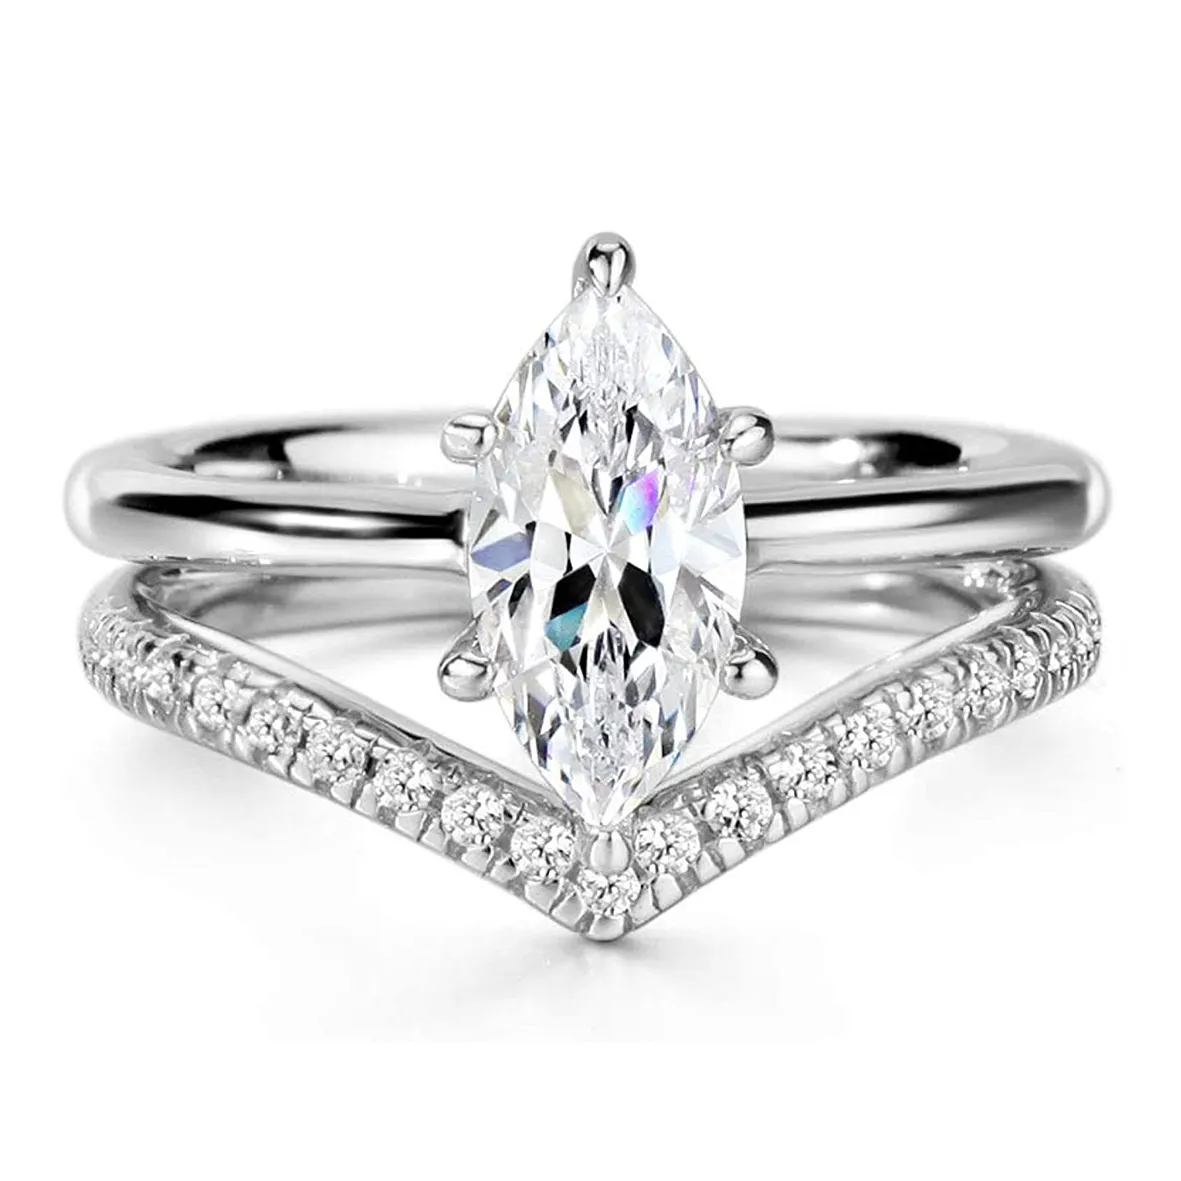 classic engagement and wedding rings set 14K White gold diamond couple rings engagement design jewelry